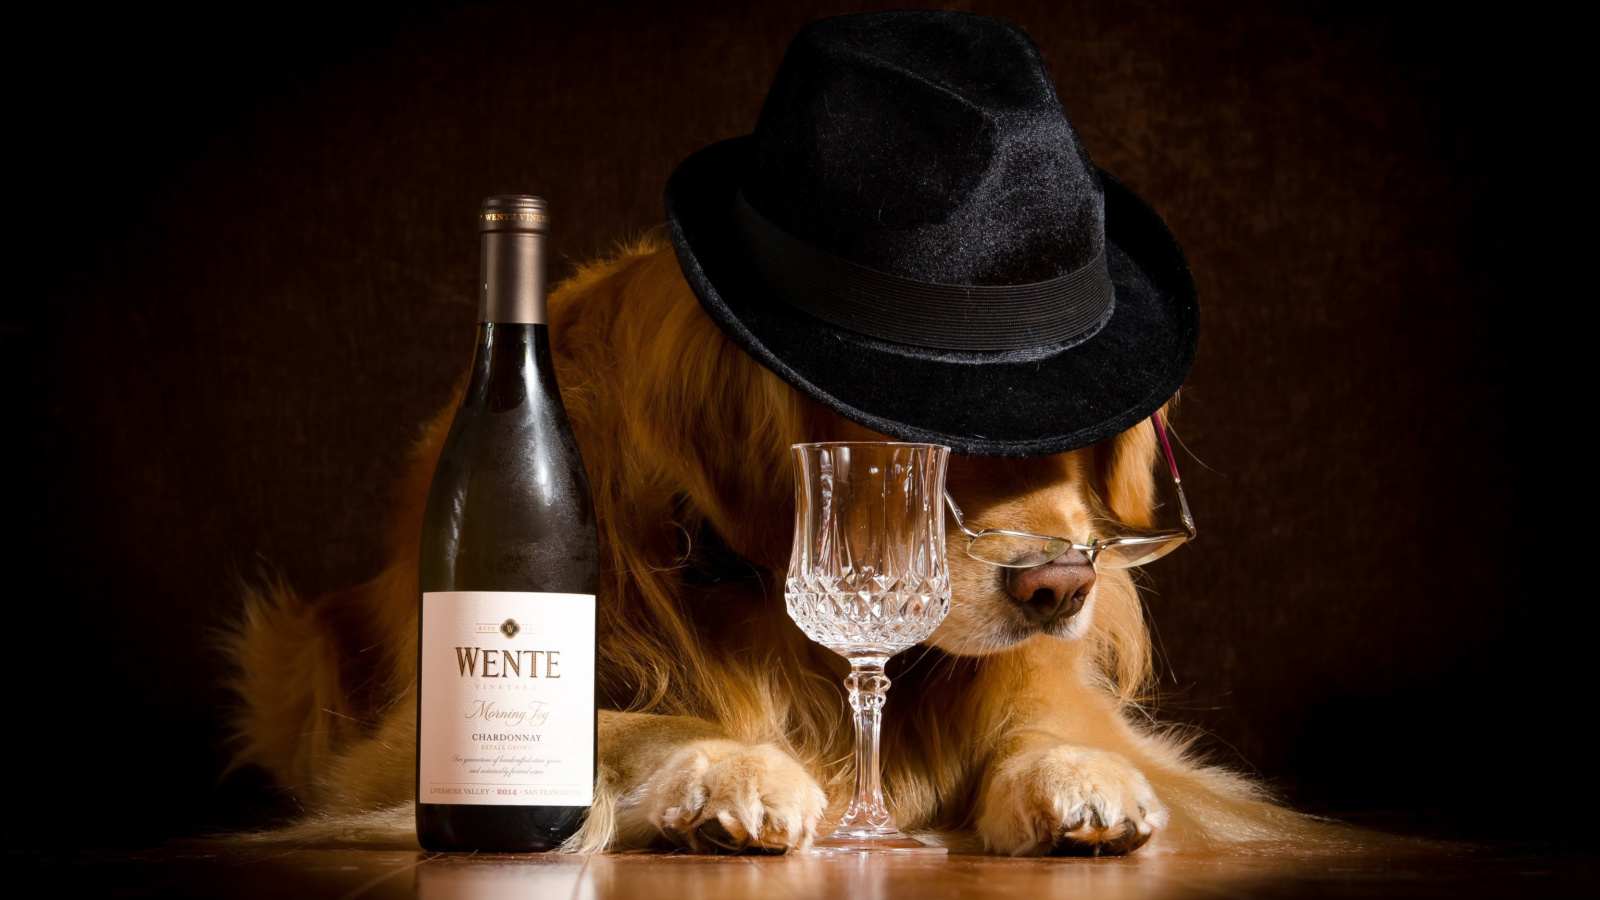 Wine and Dog wallpaper 1600x900